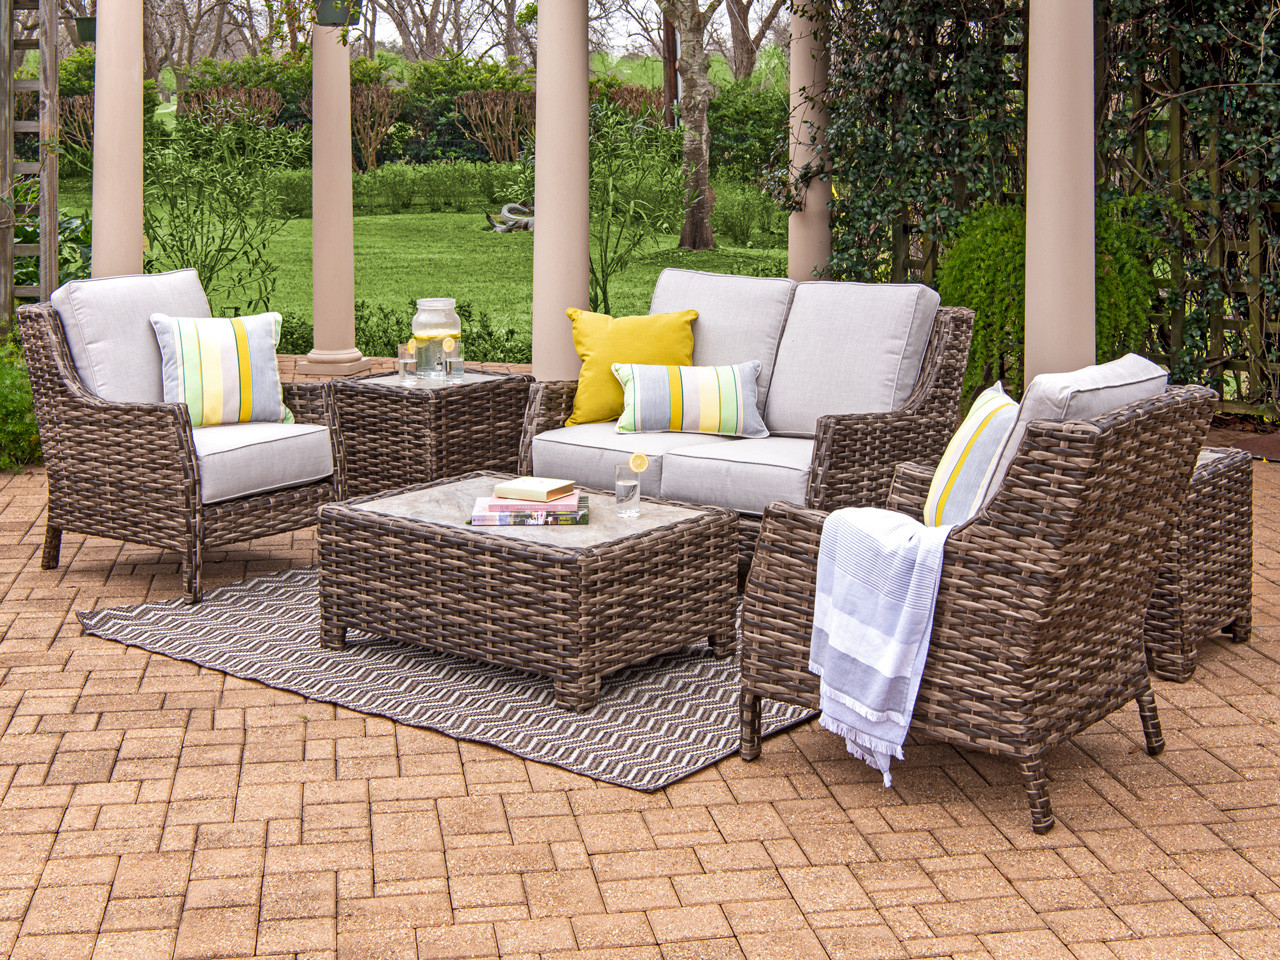 Cabo Caribou Outdoor Wicker and Idol Seagull Cushion 4 Pc. Loveseat Group with 40 x 28 in. Coffee Table